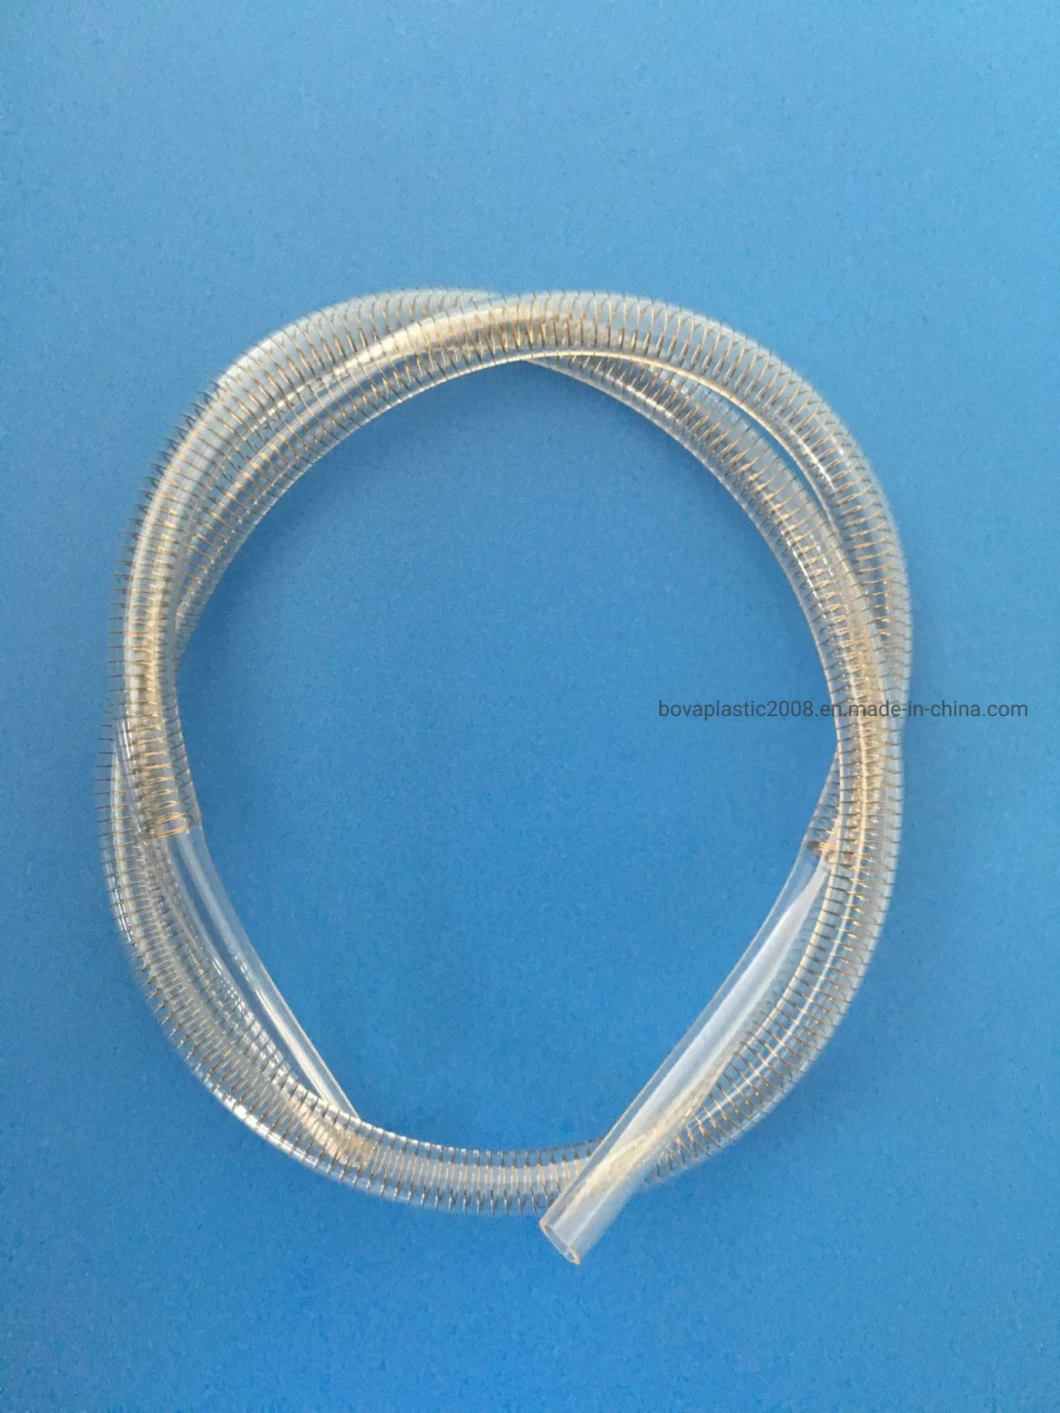 TPU Medical Catheter for Surgical Disposable Wound Edge Medical Plastic Cap